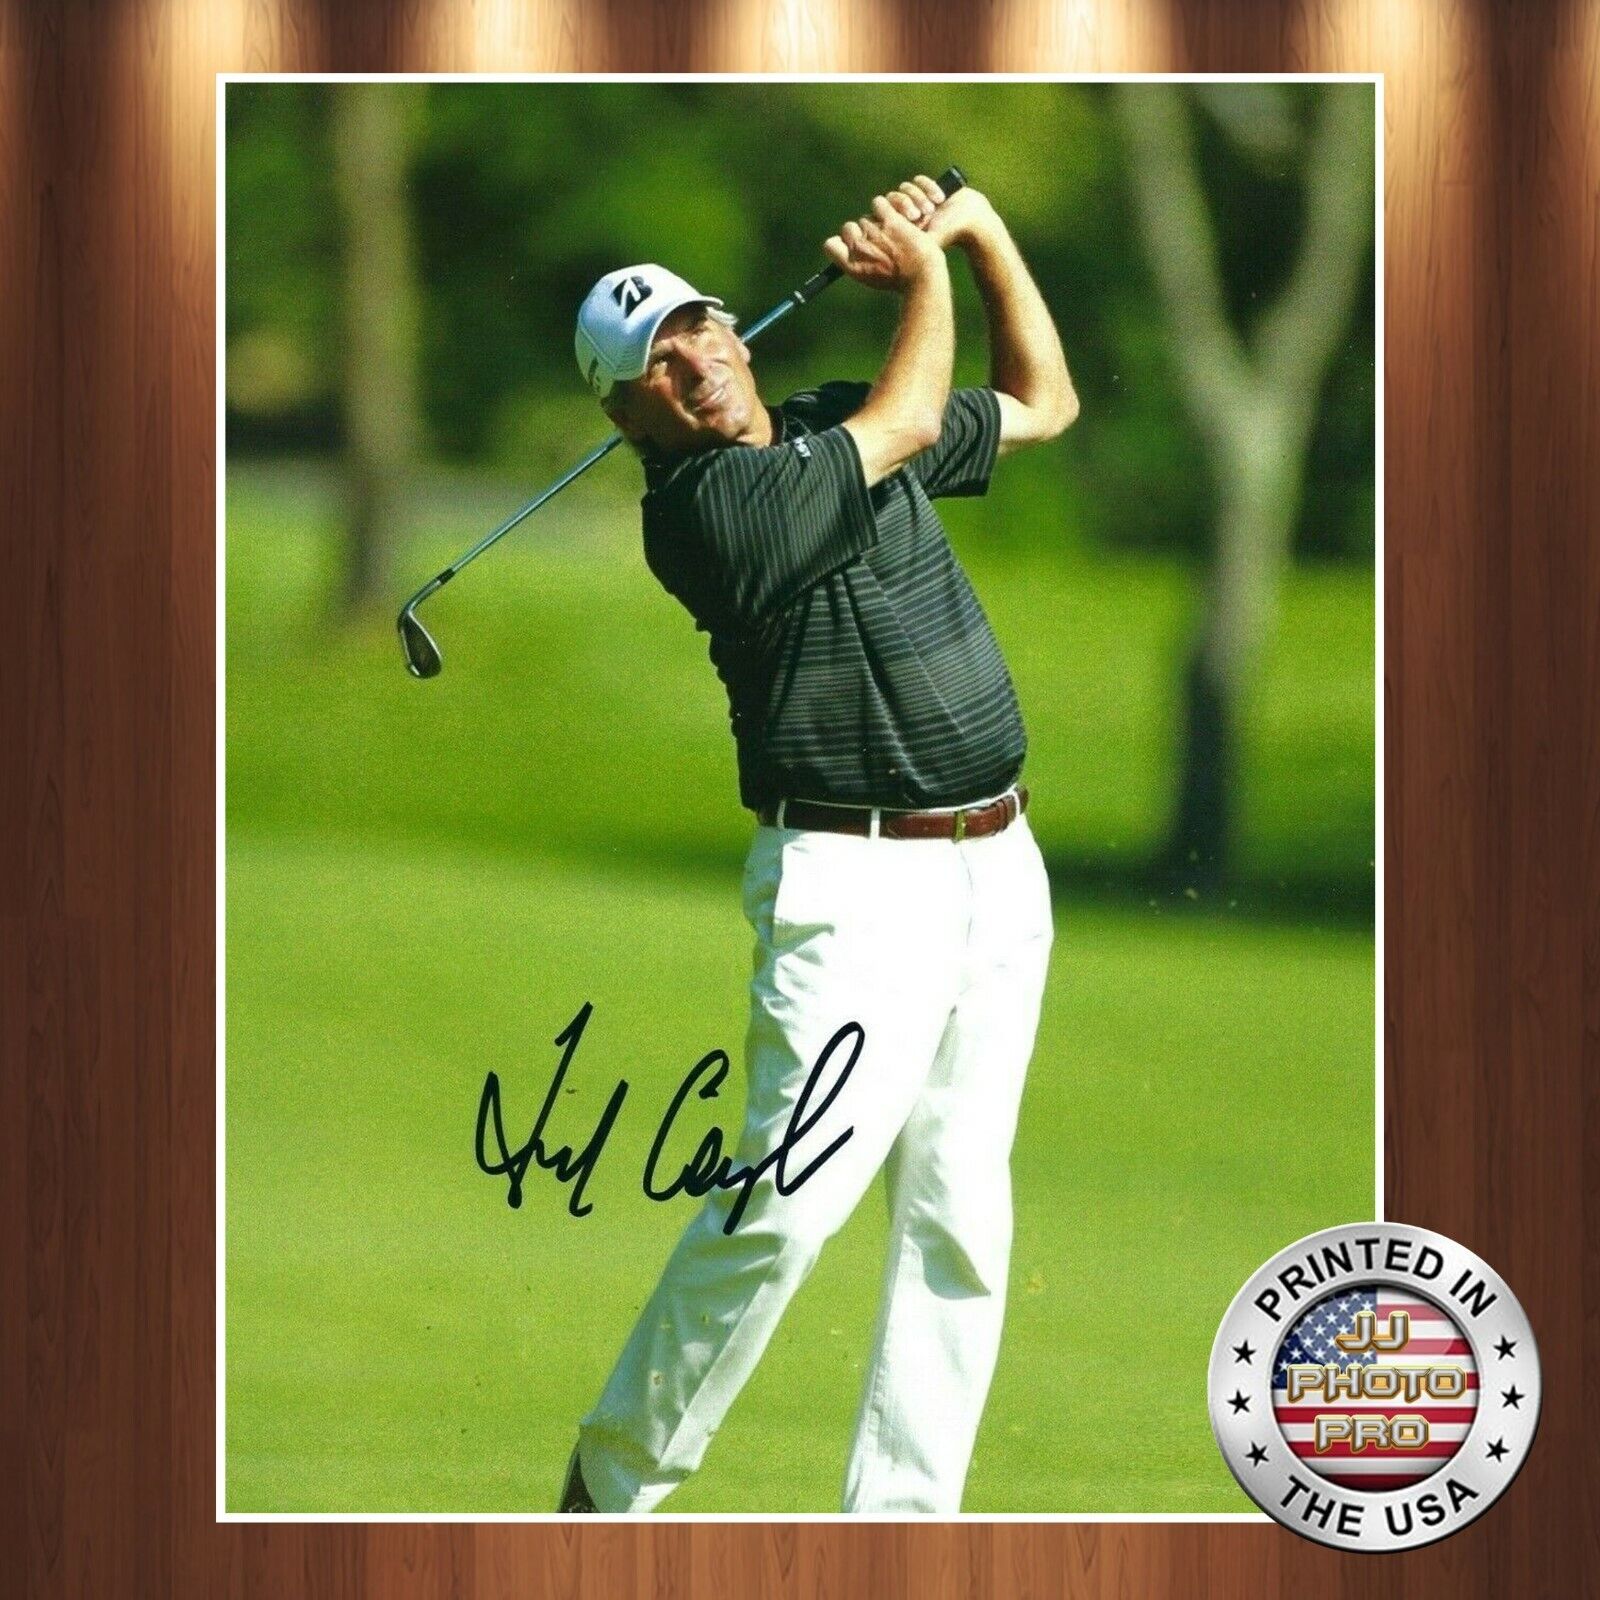 Fred Couples Autographed Signed 8x10 High Quality Premium Photo Poster painting REPRINT